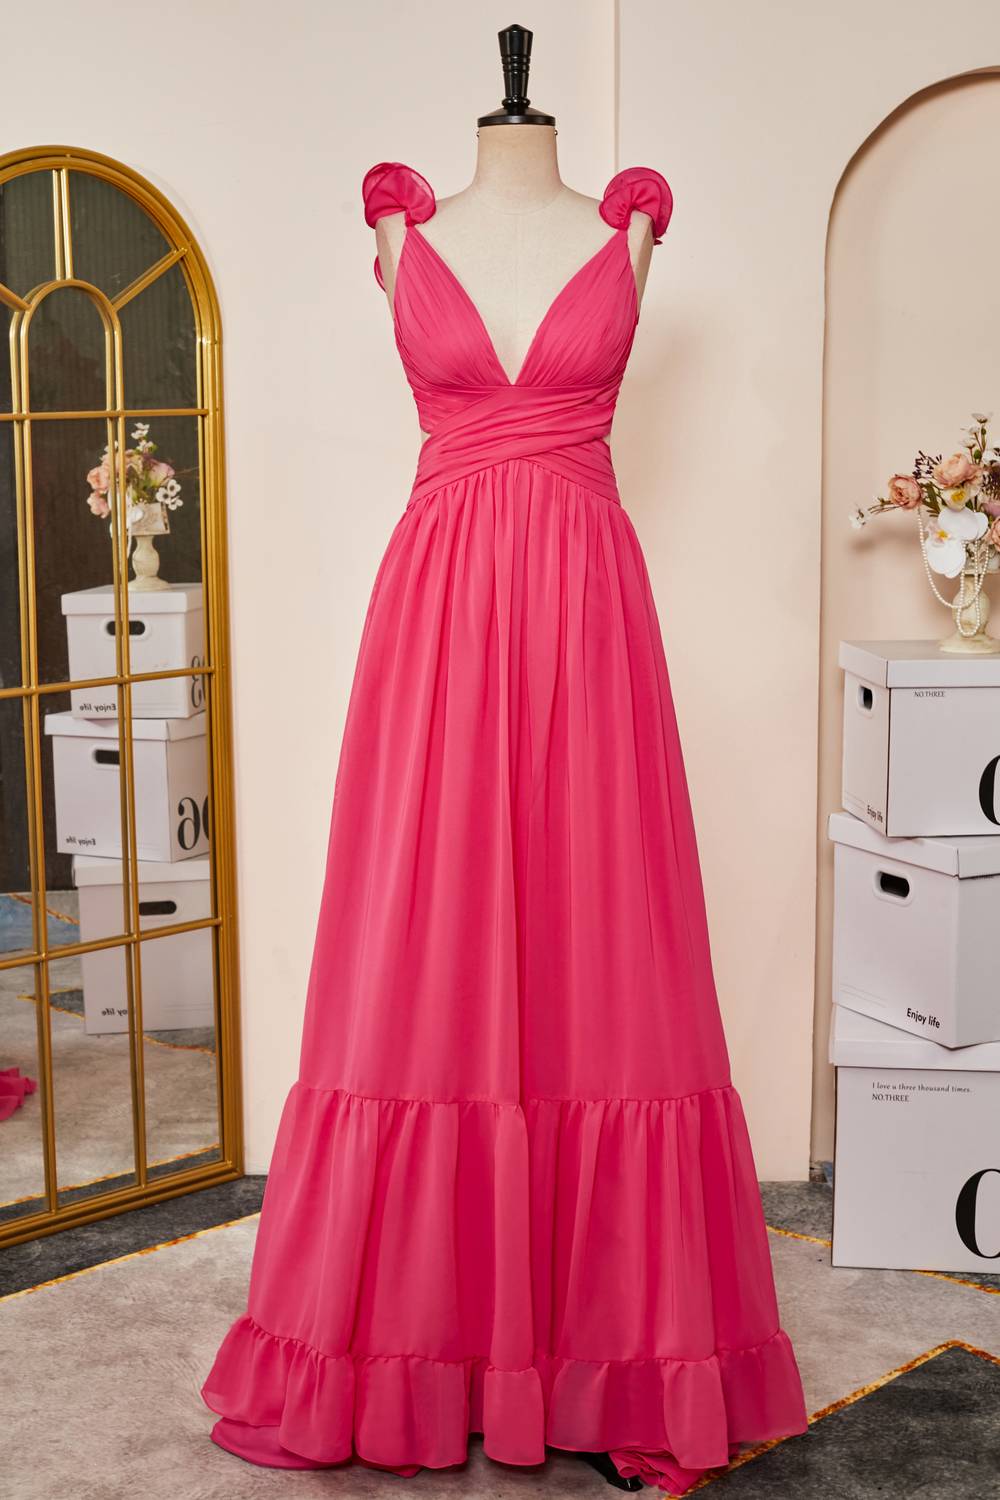 Homecoming Dressed Short, Plunging V-Neck Hot Pink Ruffled Straps A-Line Prom Dress